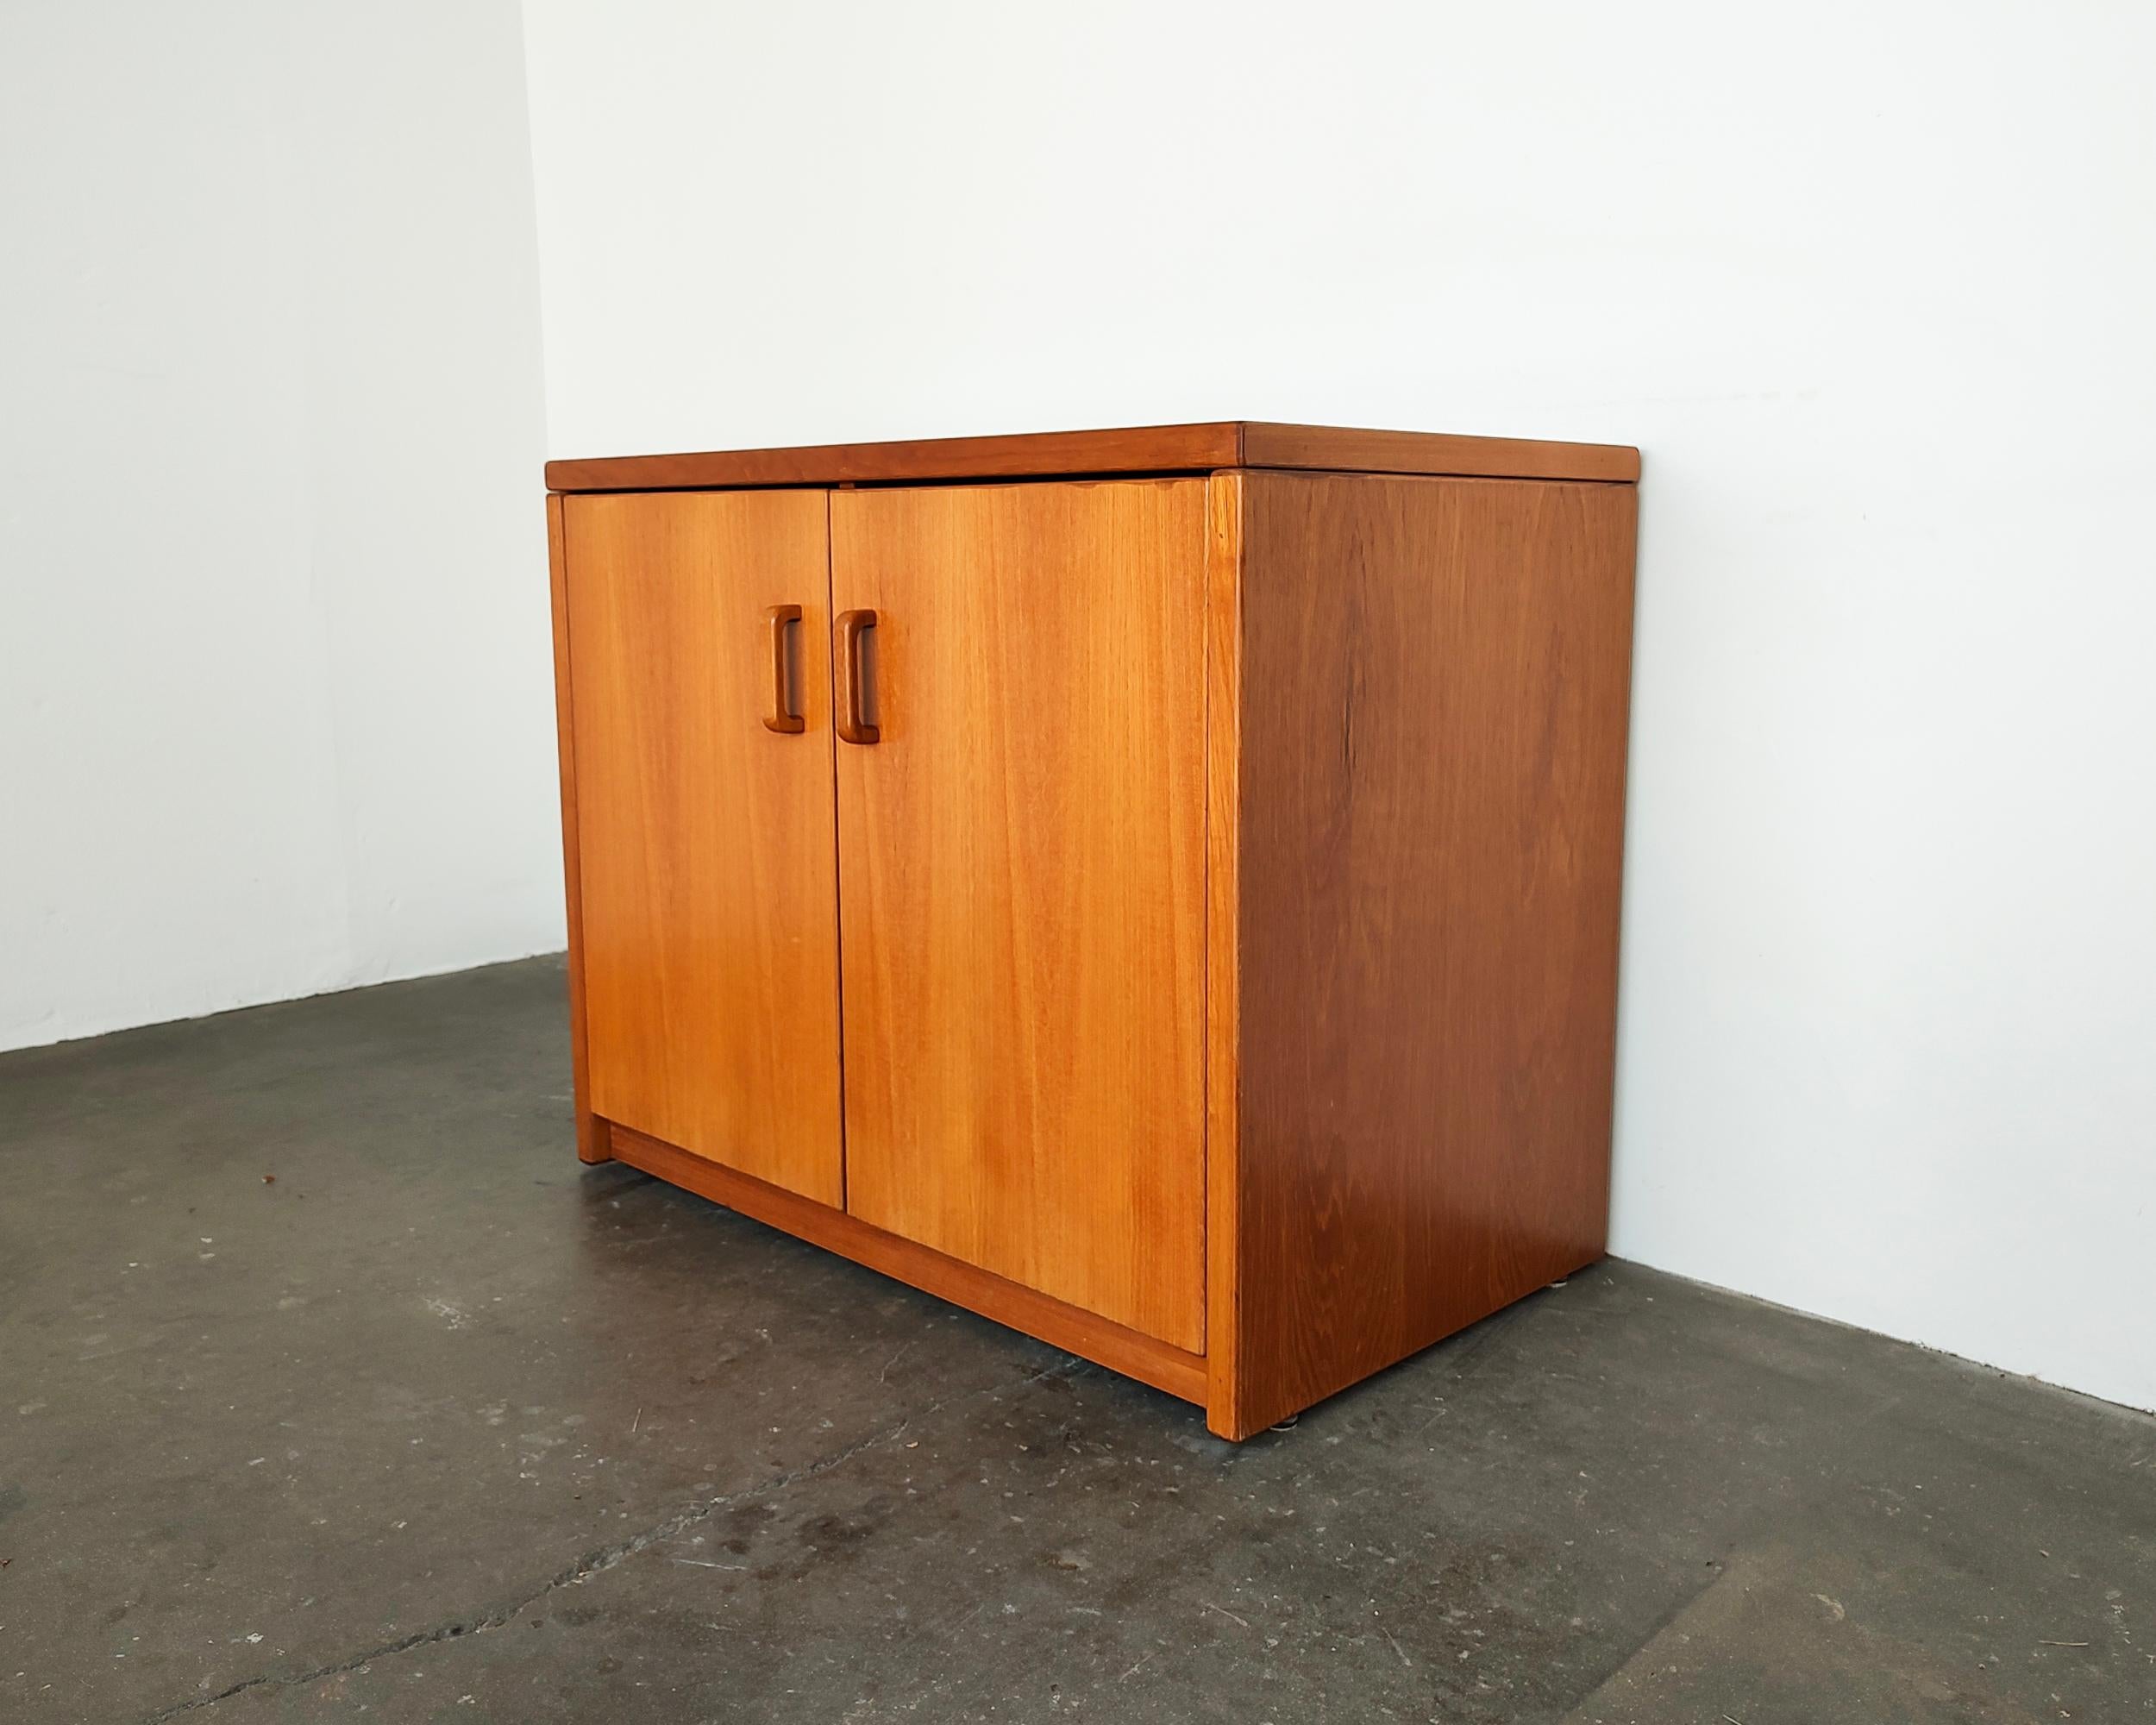 1970s small teak wood cabinet with split interior and adjustable shelves inside. Beautiful minimal design with solid teak pulls. Overall great condition, some light wear present consistent with vintage age.

36